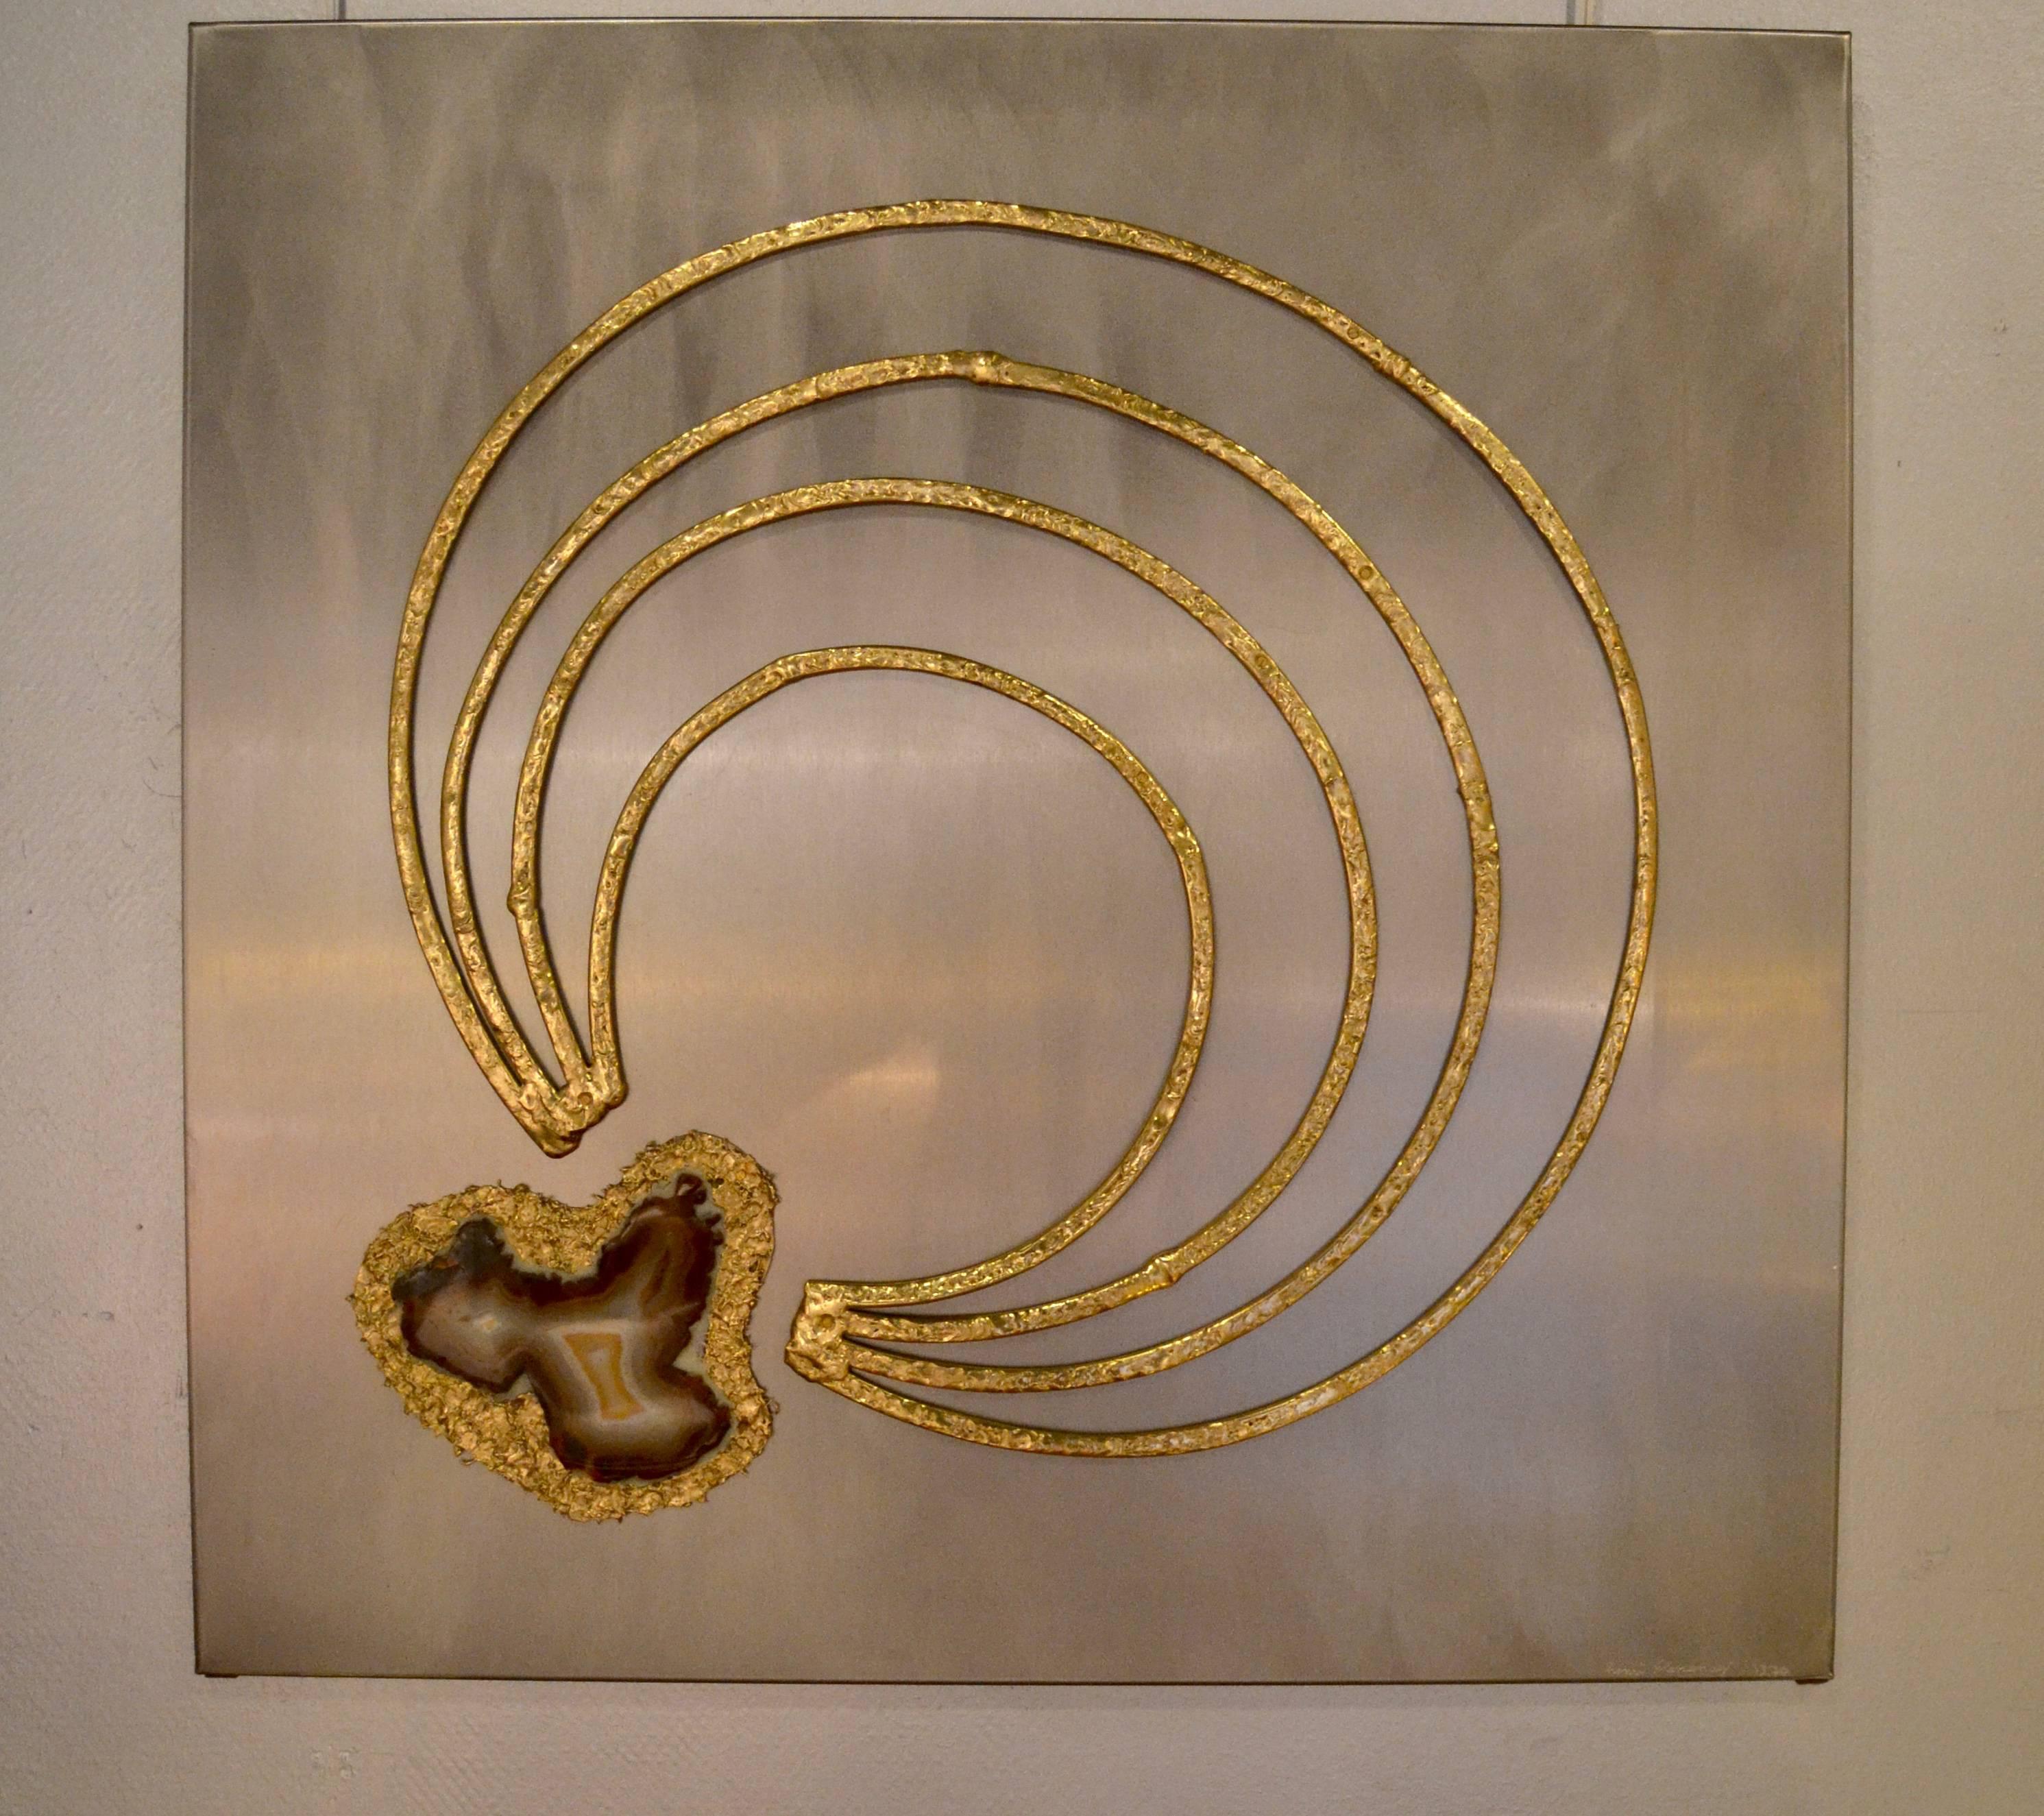 1970s steel panel in brass and agate inlaid by The French artist Henri Hernandez. Steel panel 
Signed.